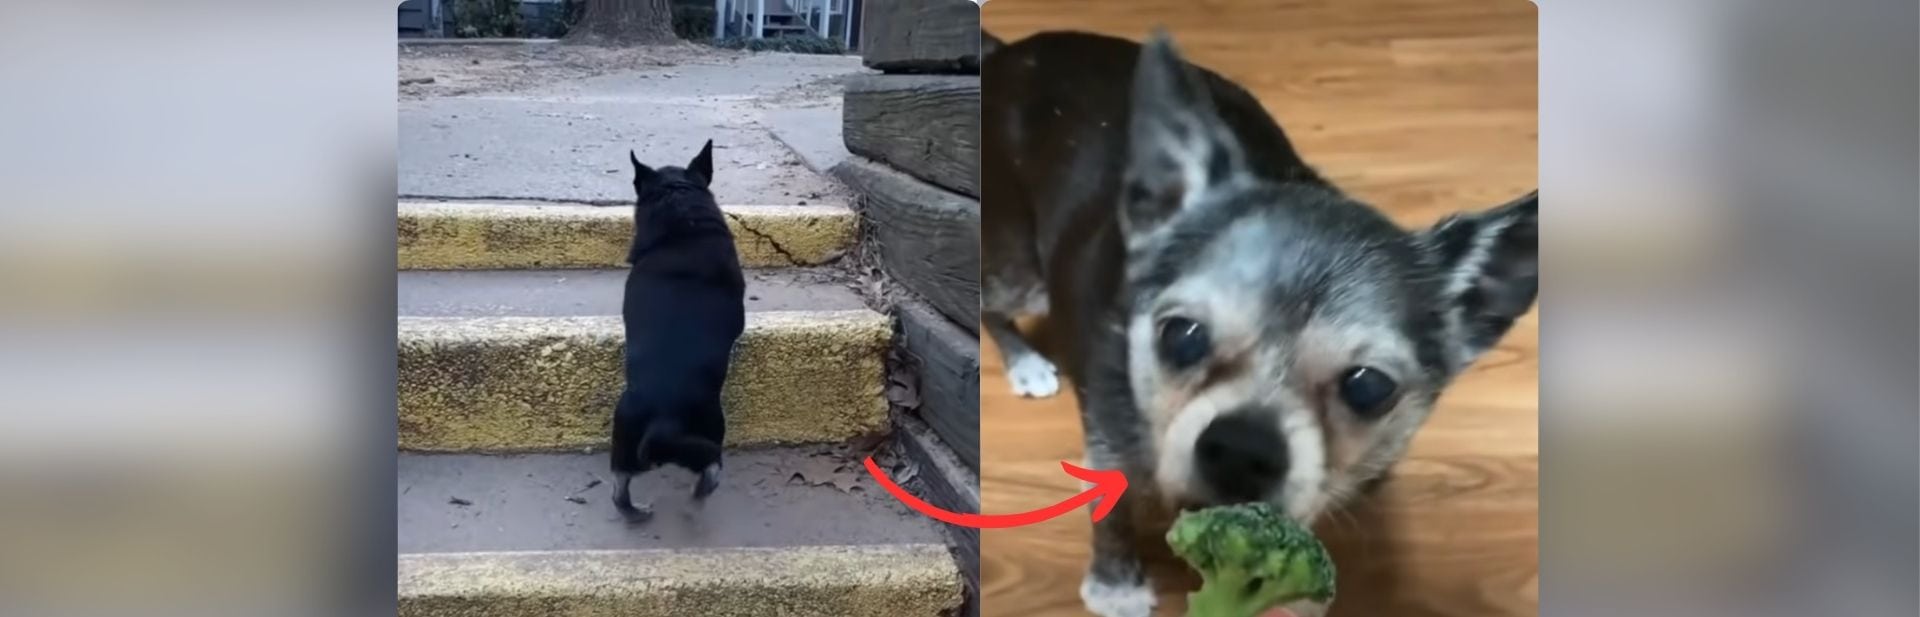 Overweight Chihuahua Named Shorty Finds New Lease on Life After Adoption Through Incredible Health Transformation